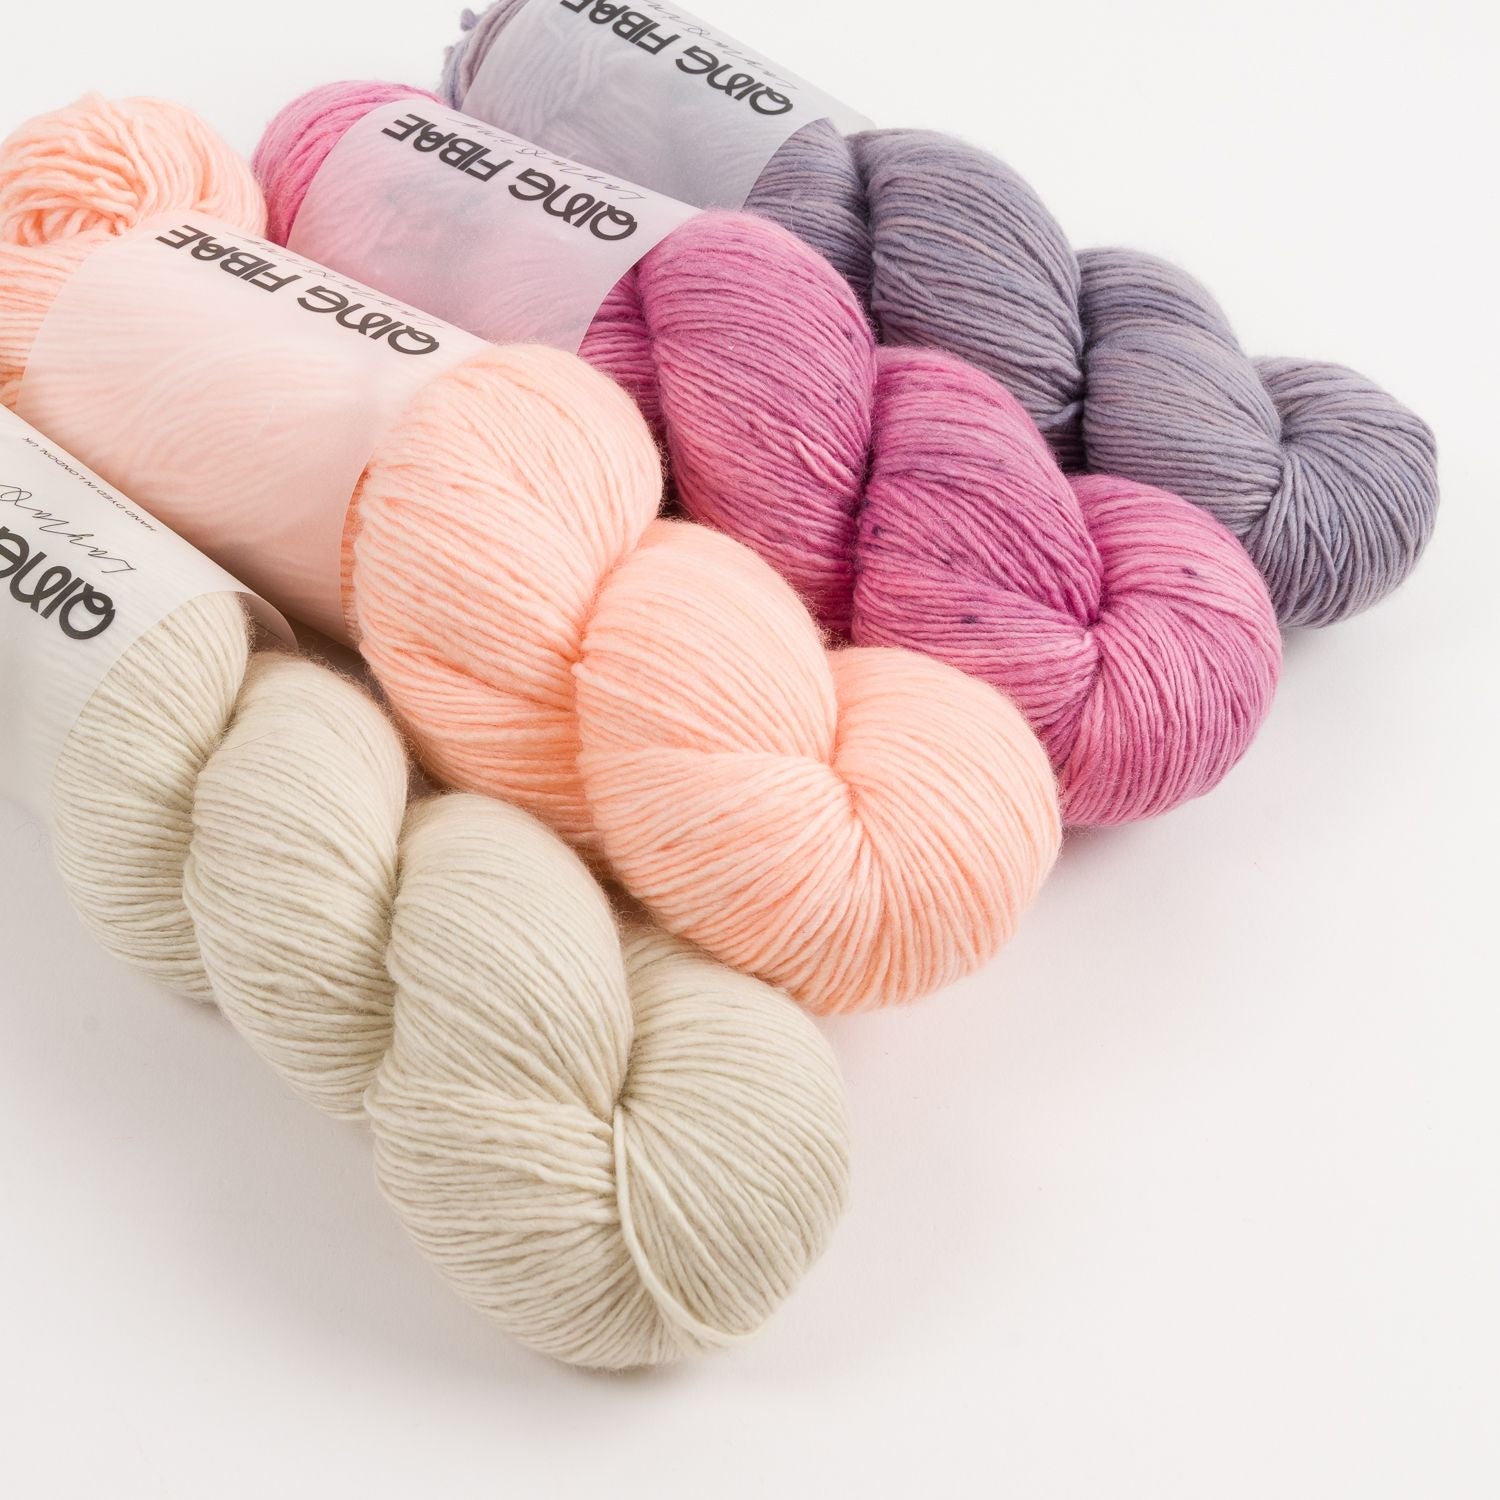 WESTKNITS KIT - PEACHES AND CREAM